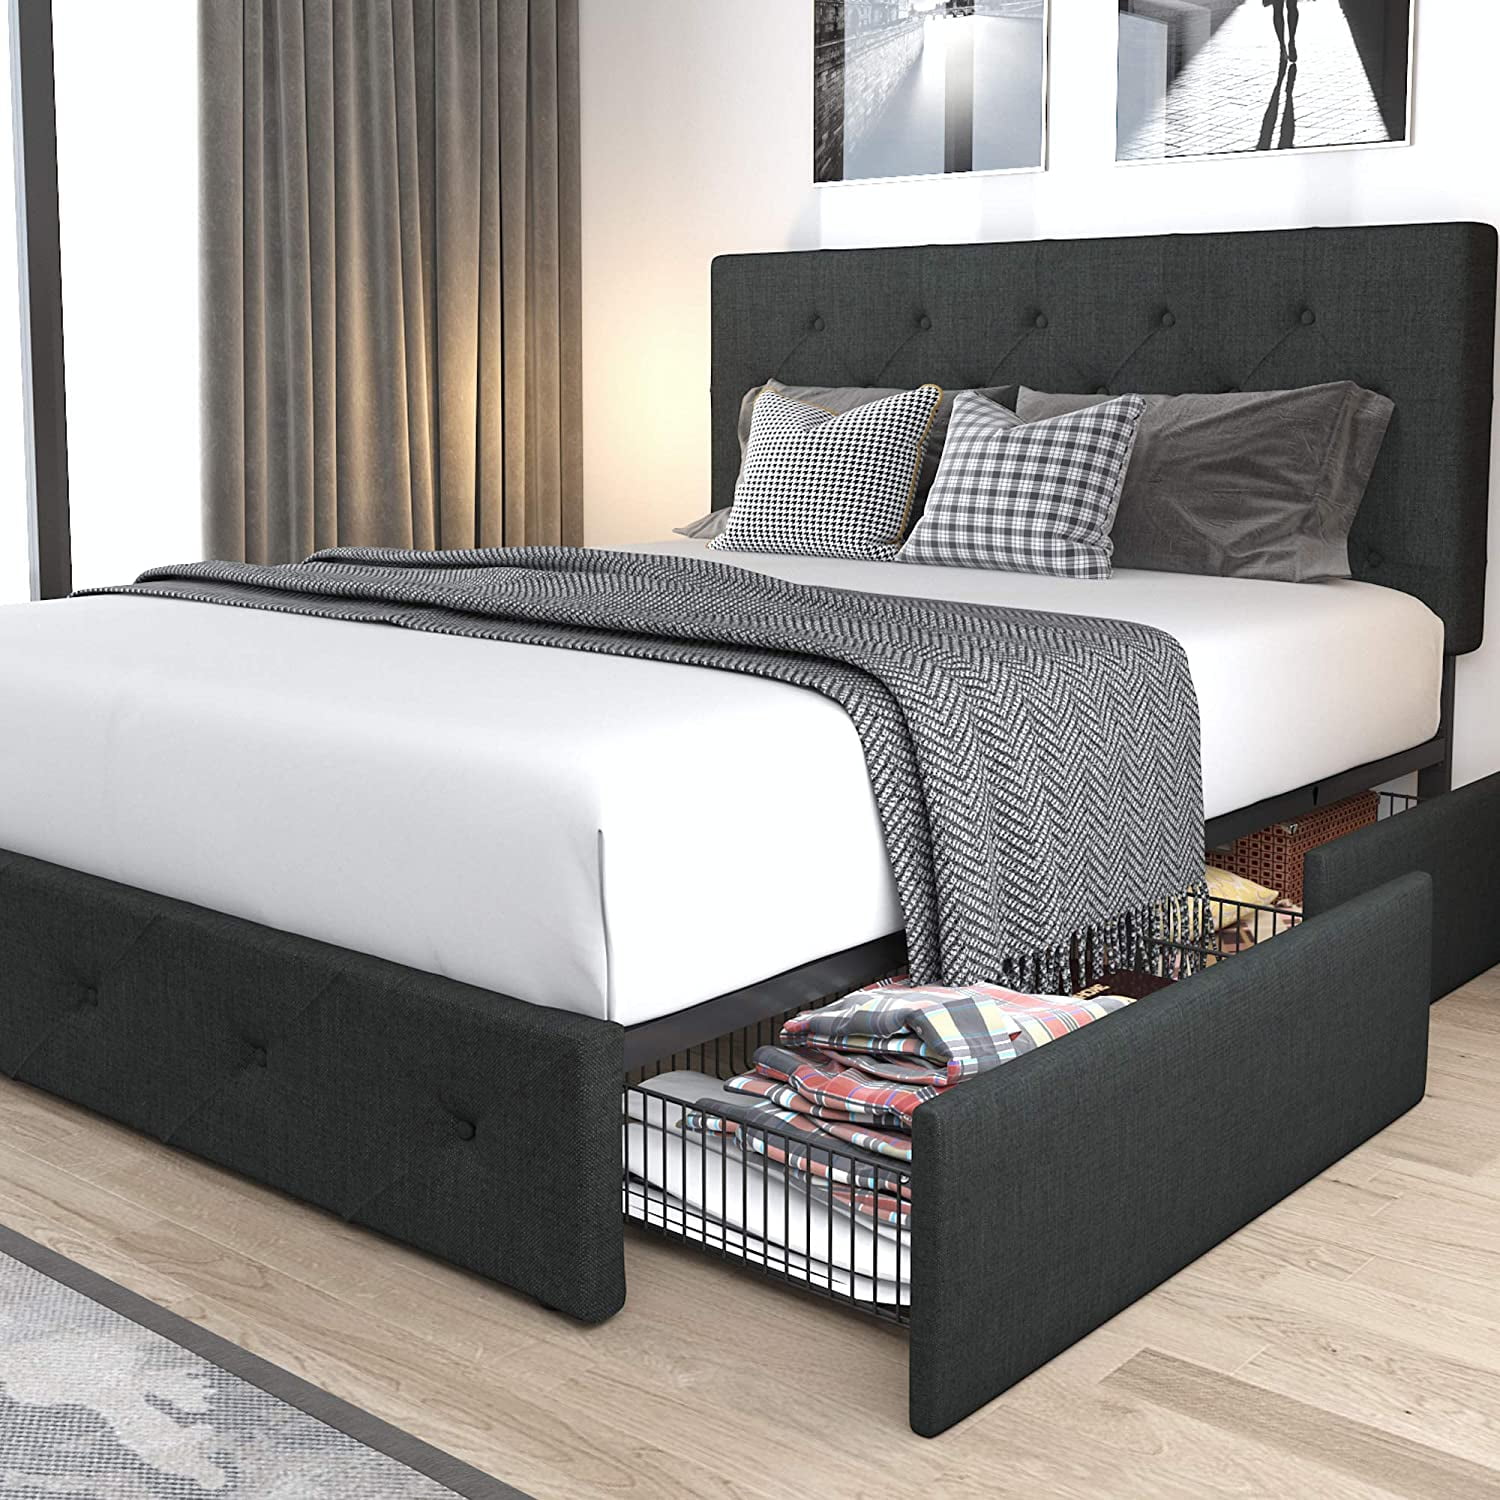 Allewie Queen Platform Bed Frame With 4, Queen Bed Frames With Drawers Underneath